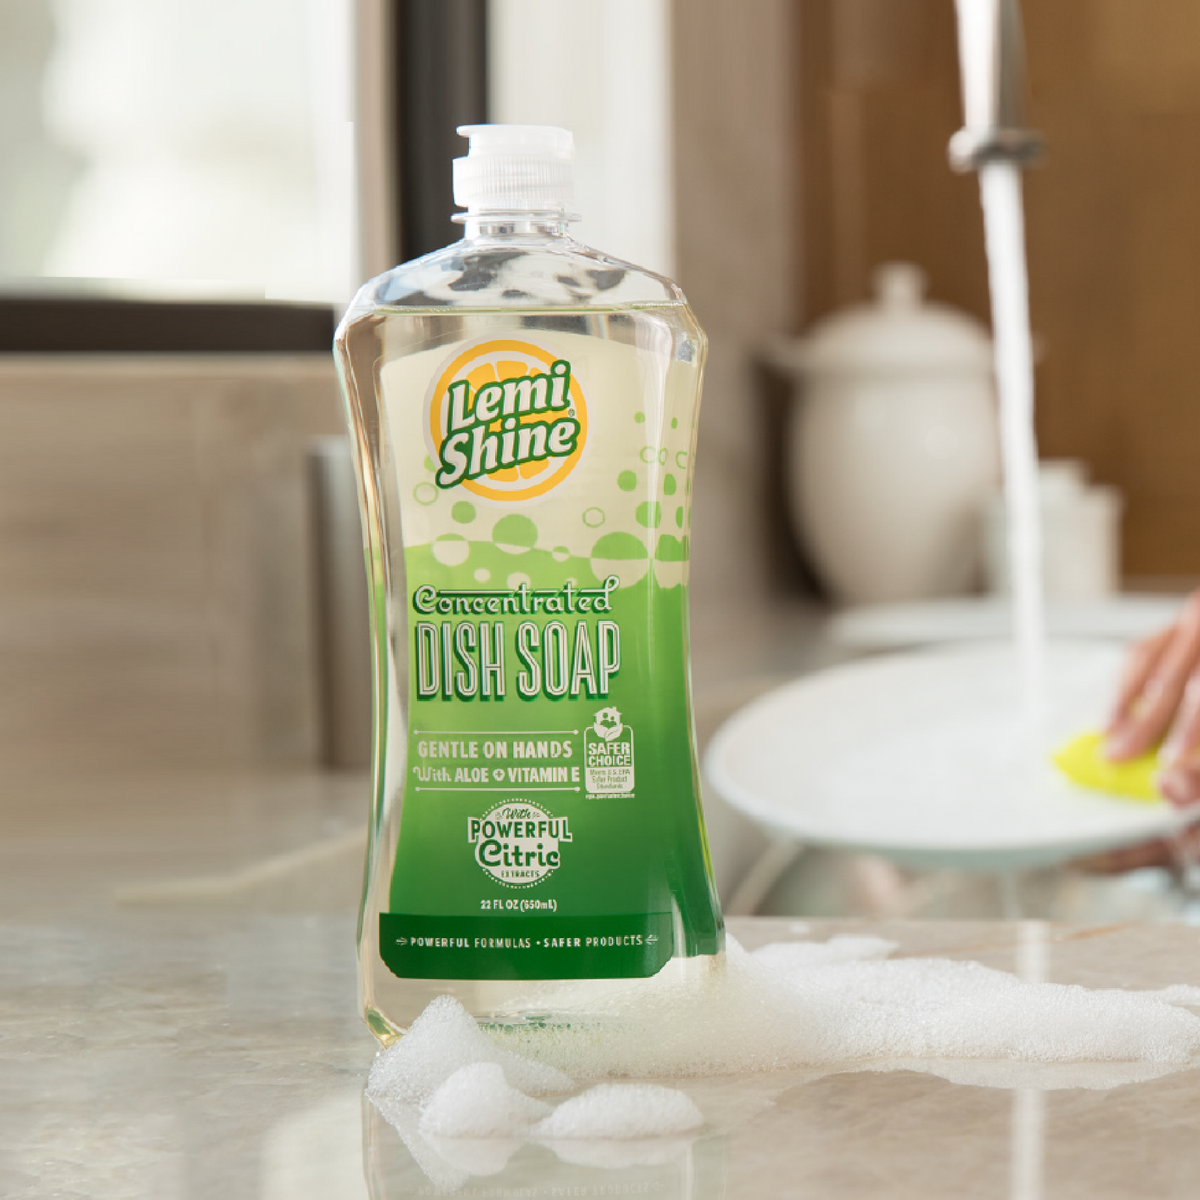 The Best Non-Toxic Dish Soaps - Center for Environmental Health